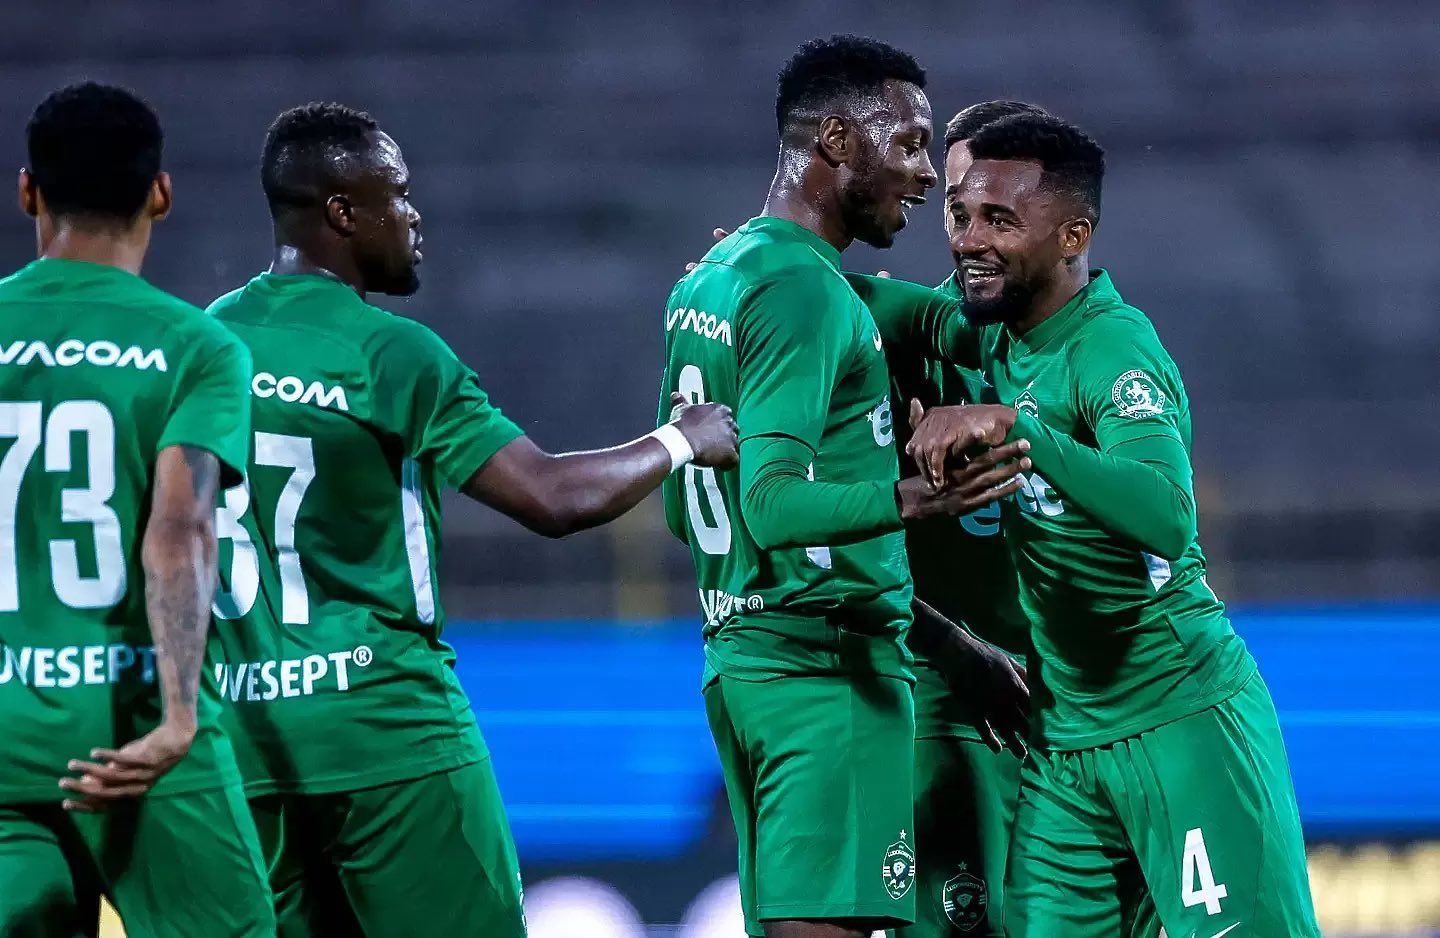 Ludogorets and Ballkani will square off in the Champions League qualifiers on Wednesday